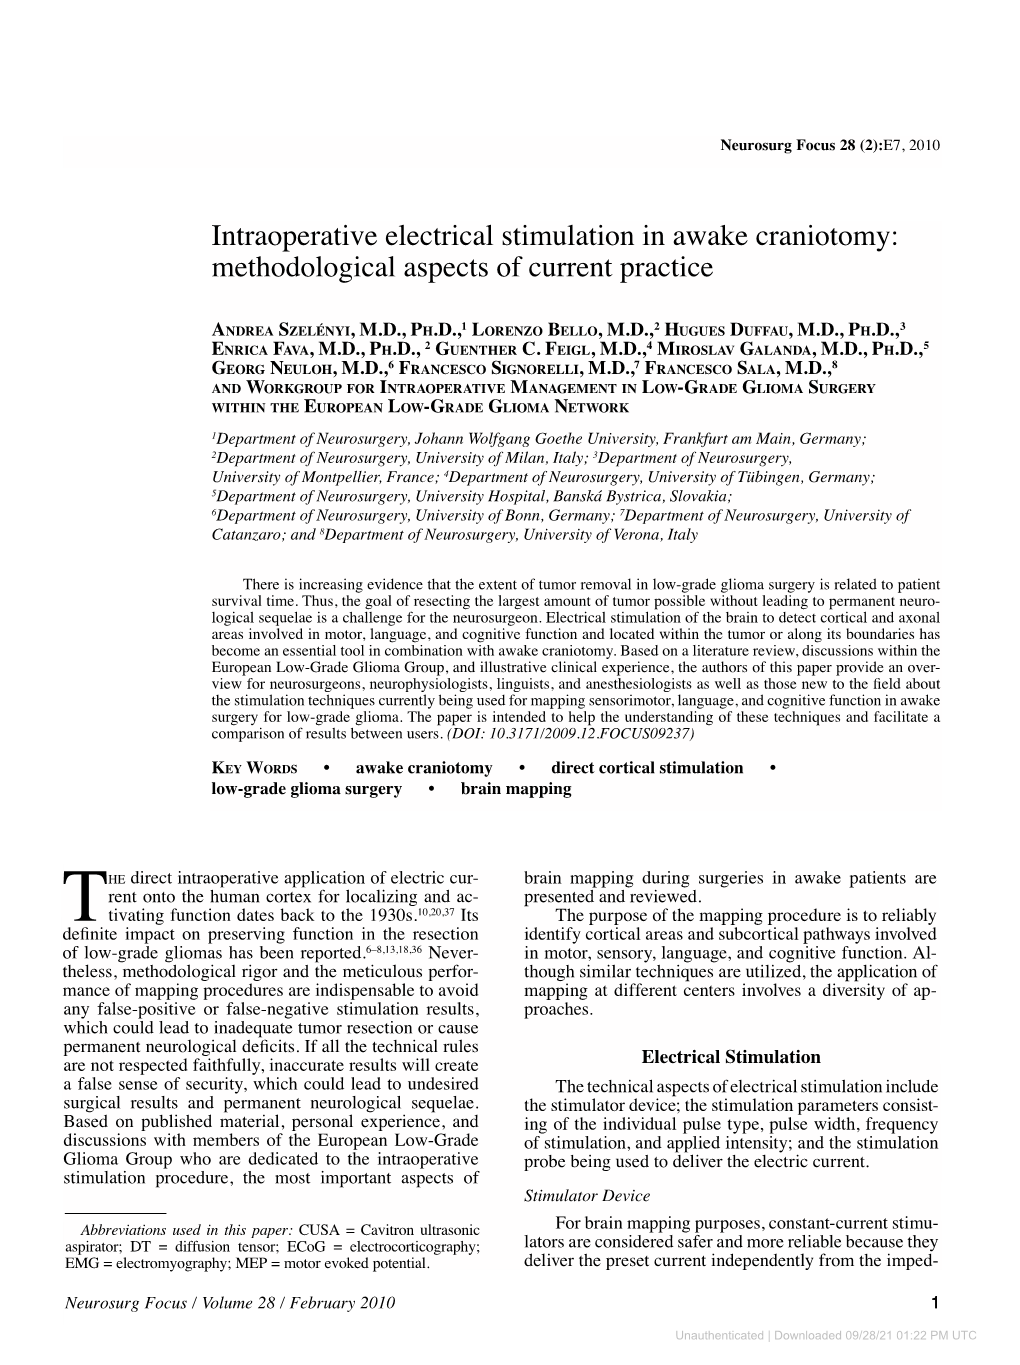 Intraoperative Electrical Stimulation in Awake Craniotomy: Methodological Aspects of Current Practice